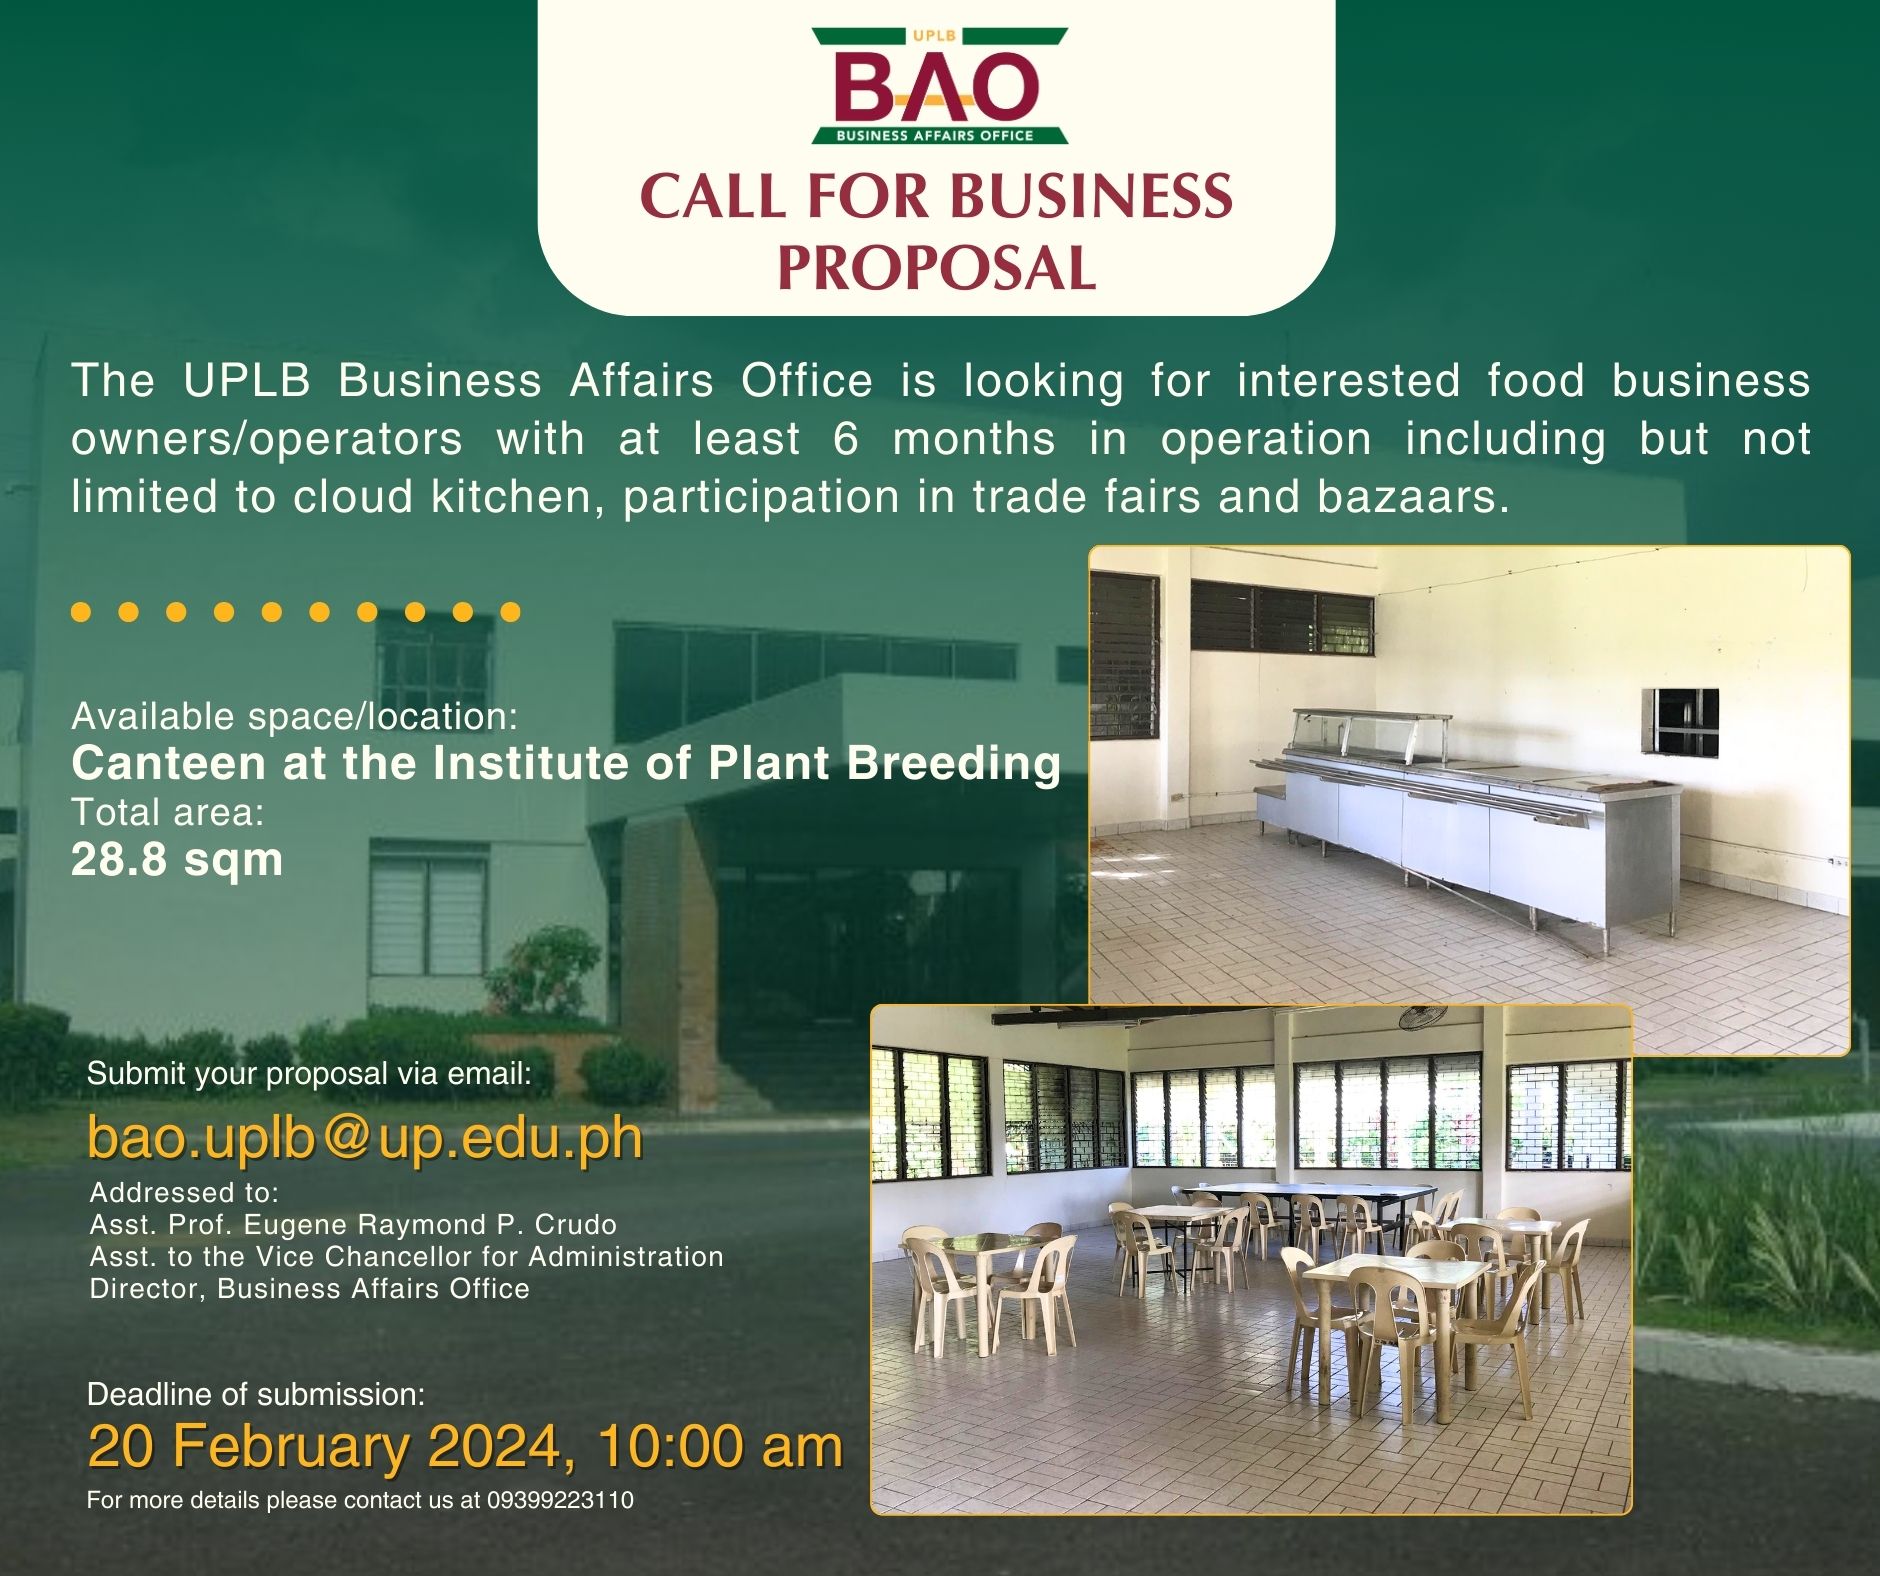 CALL FOR BUSINESS PROPOSAL